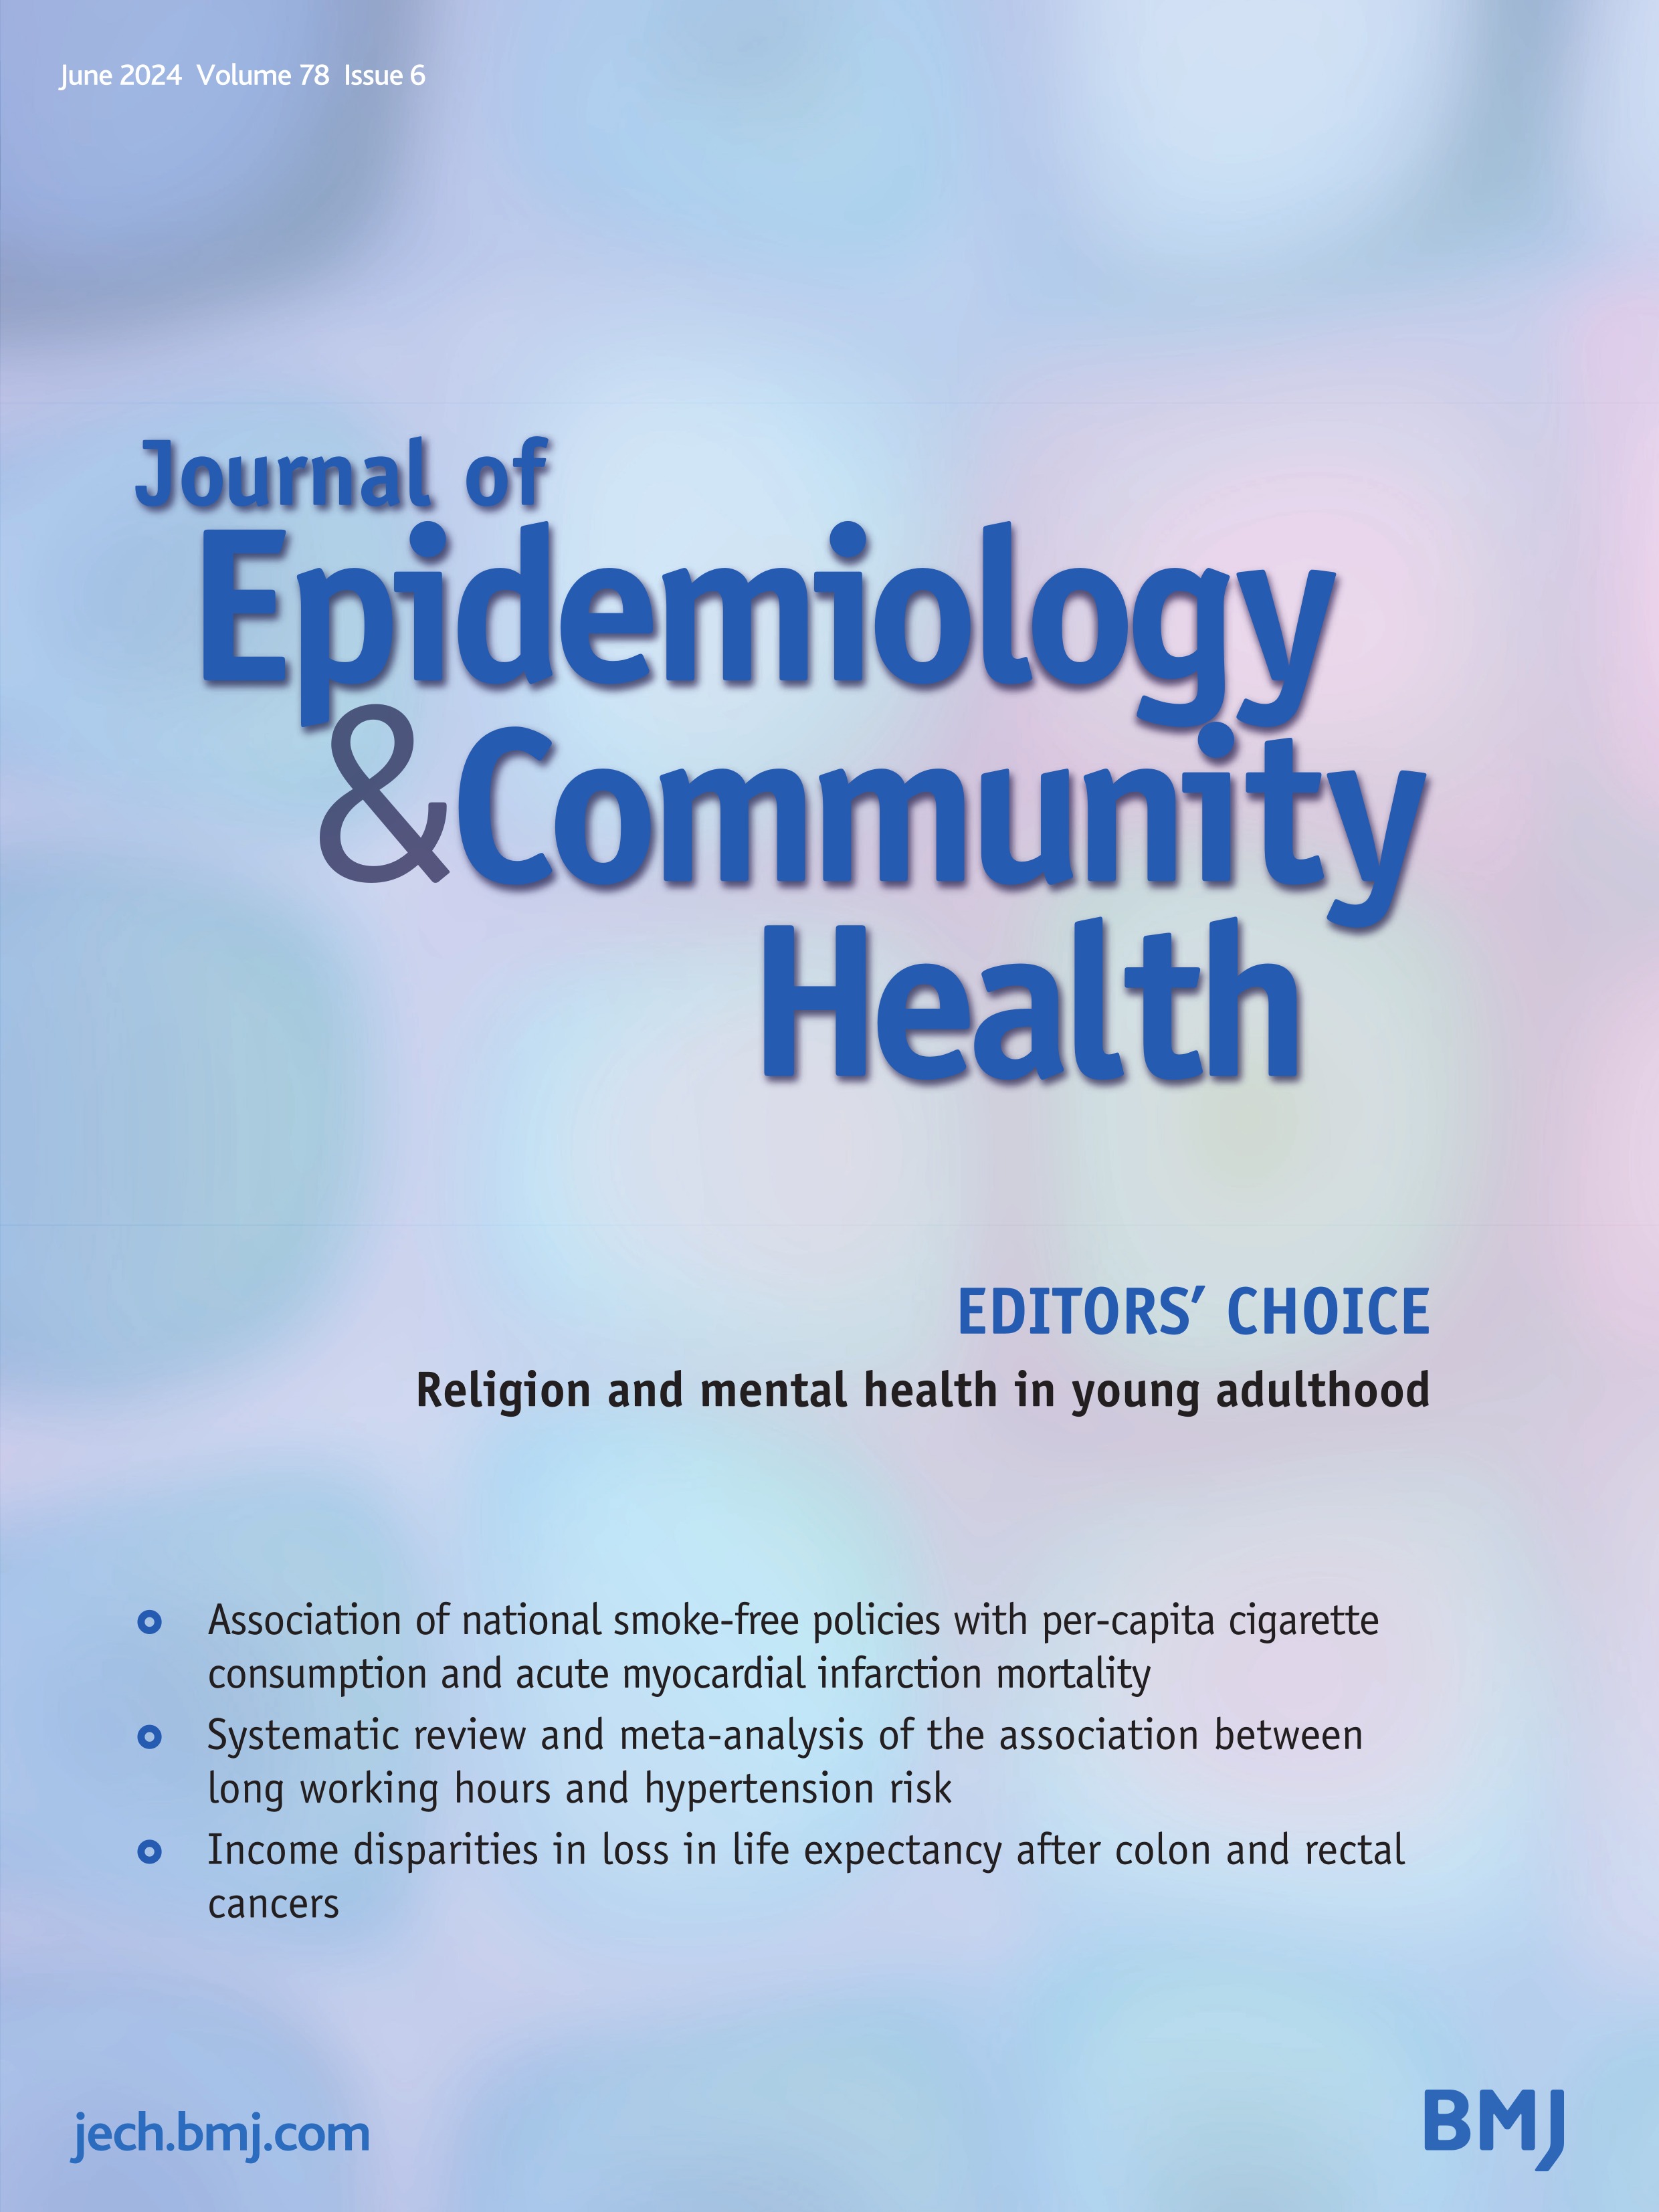 Religion and mental health in young adulthood: a register-based study on differences by religious affiliation in sickness absence due to mental disorders in Finland